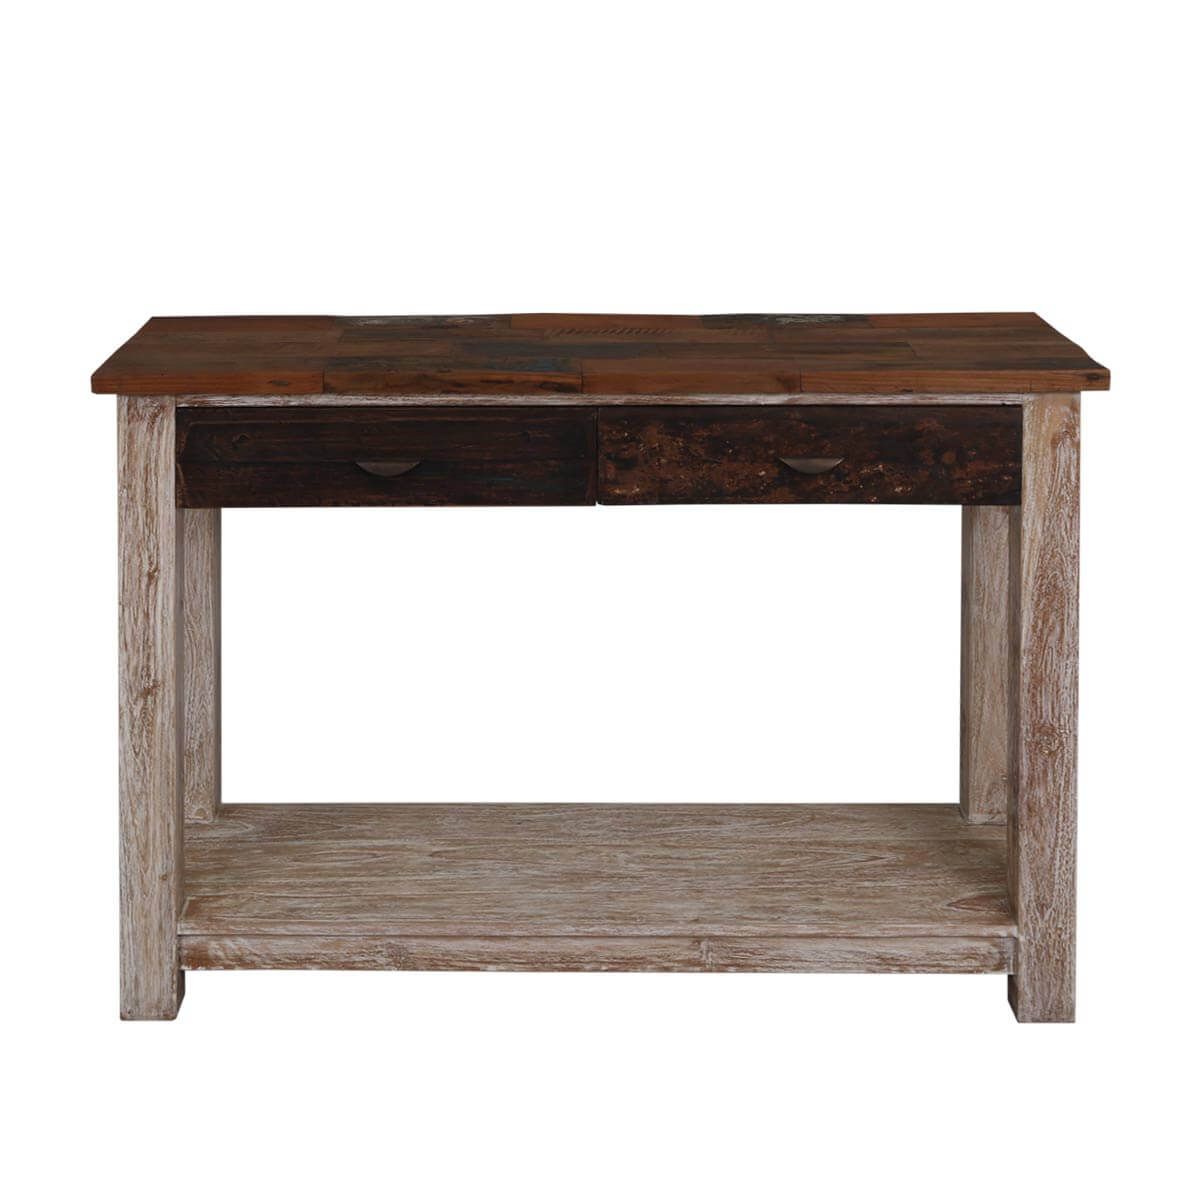 Santino Rugged Reclaimed Wood 2 Drawer Entryway Console Table With Regard To Reclaimed Wood Console Tables (View 12 of 20)